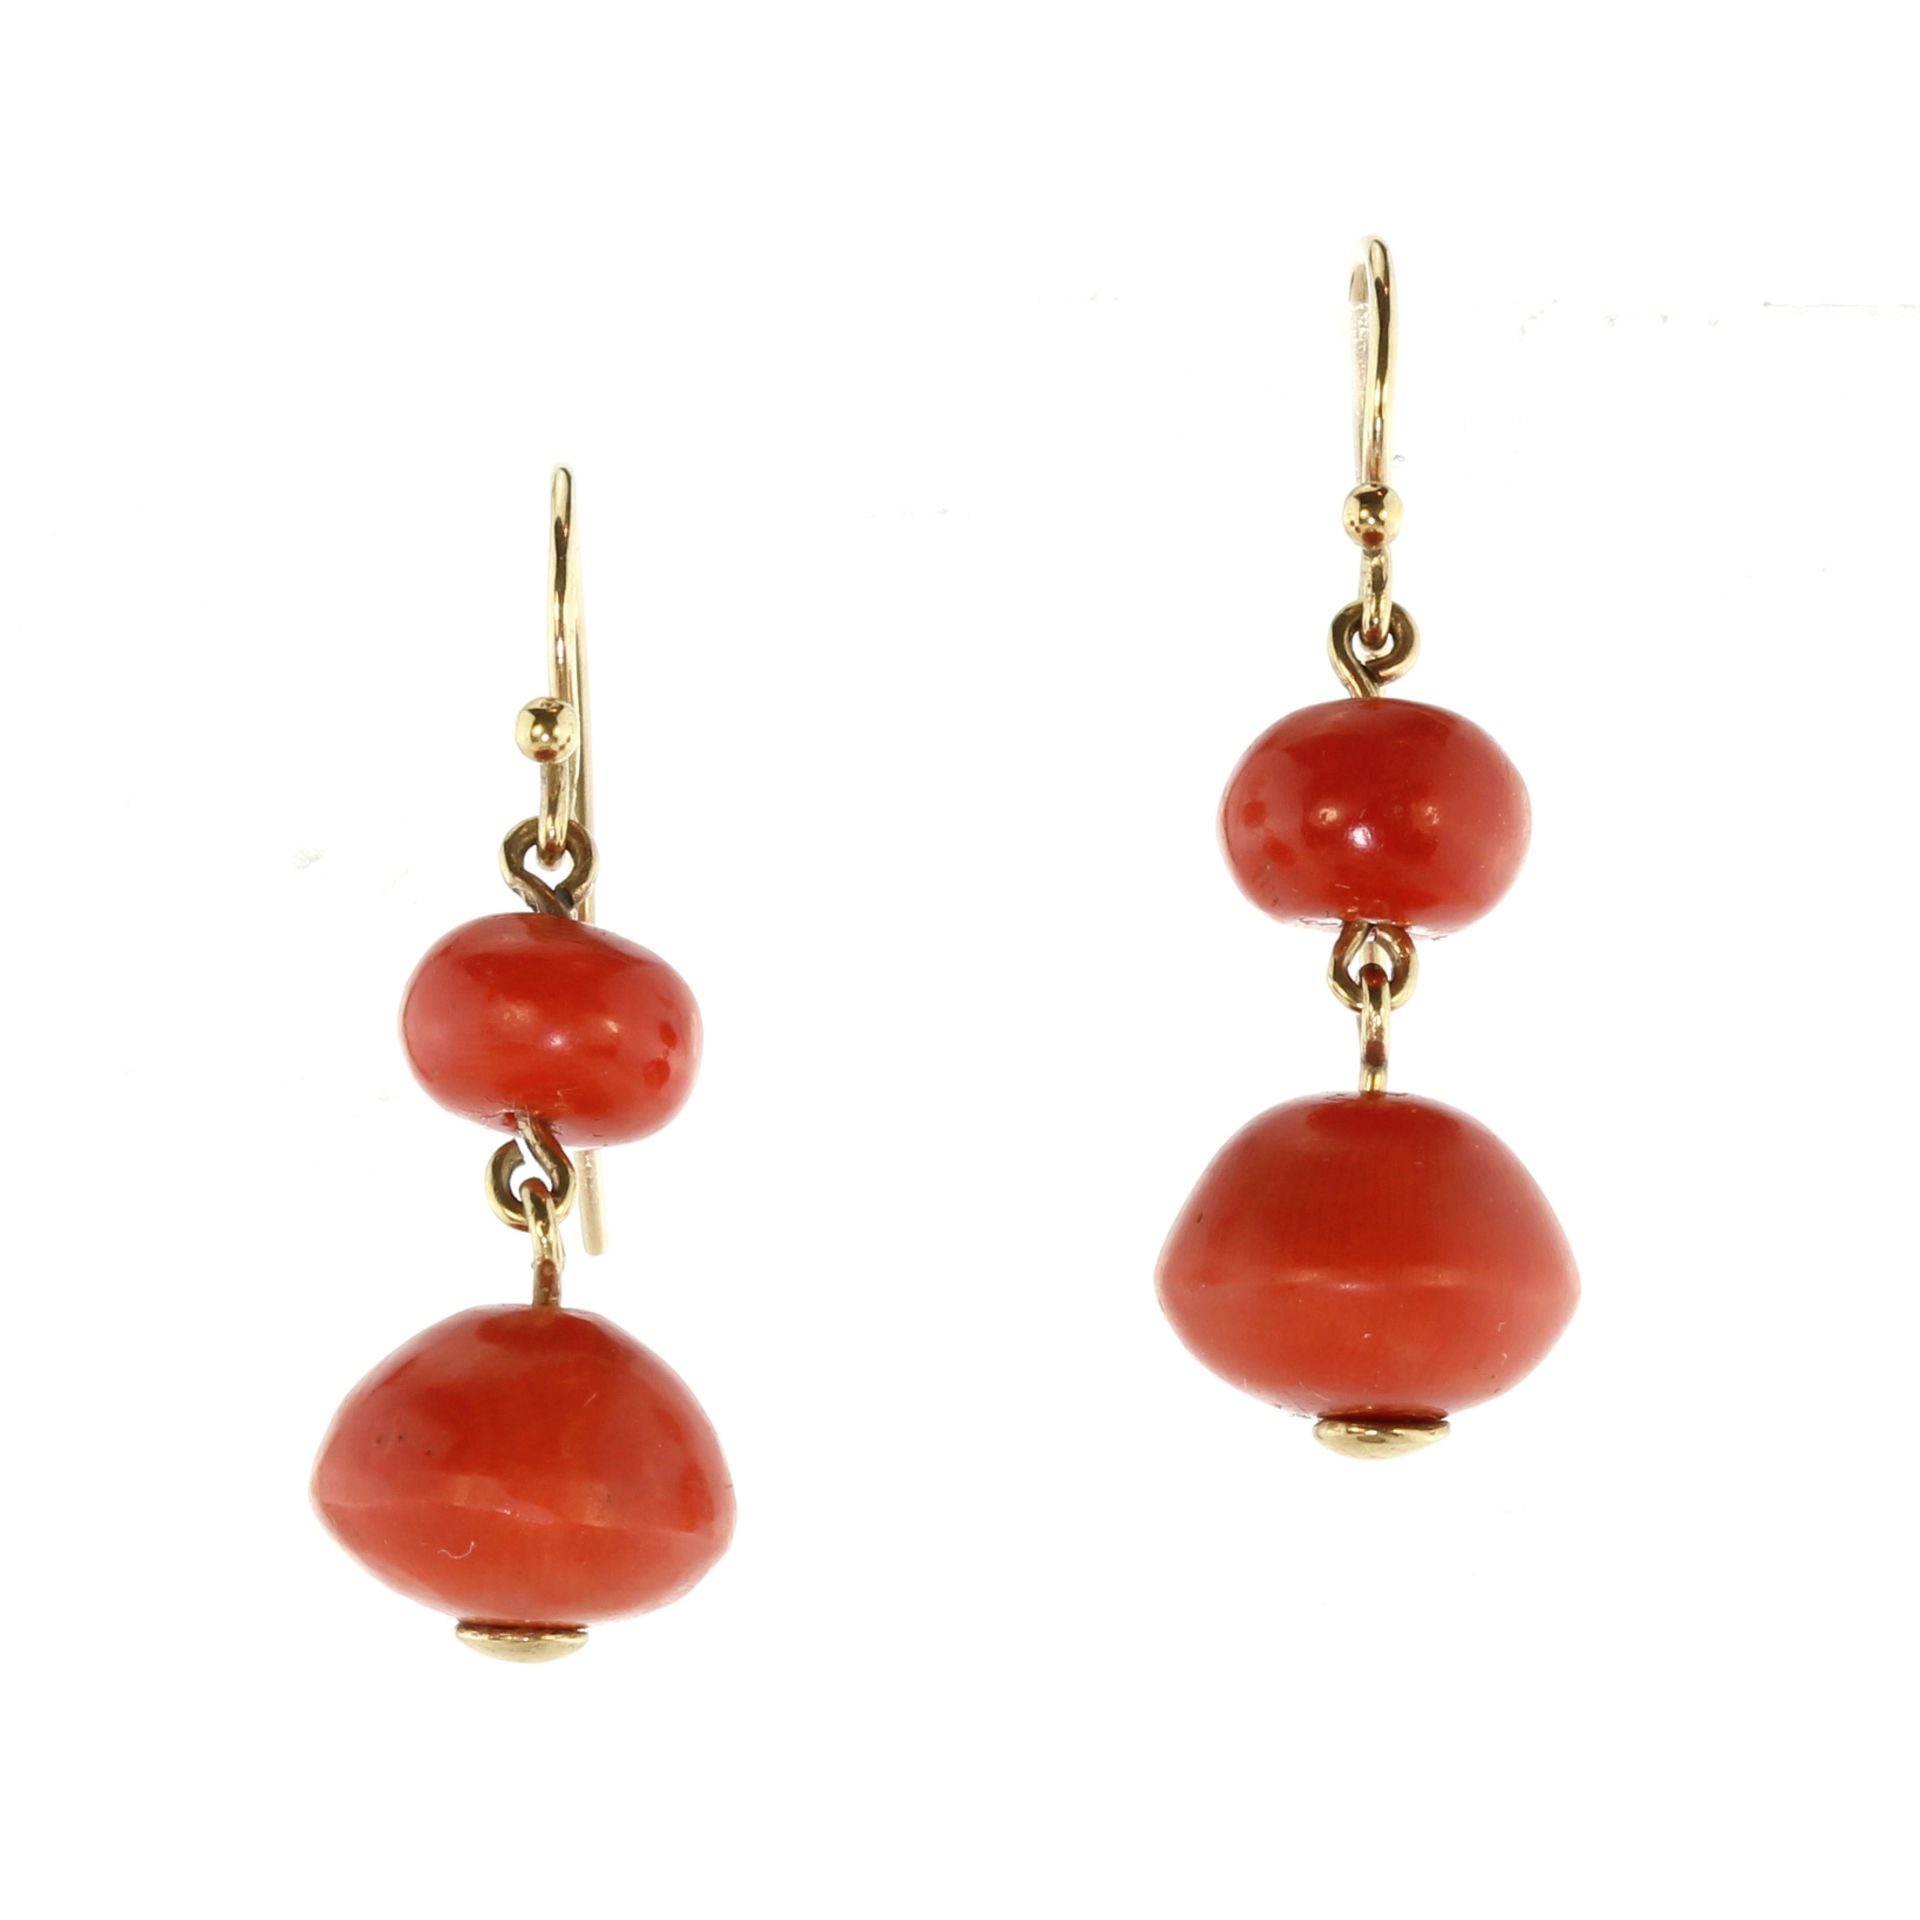 A pair of antique coral drop earrings with gold mounts each designed as two graduated coral beads